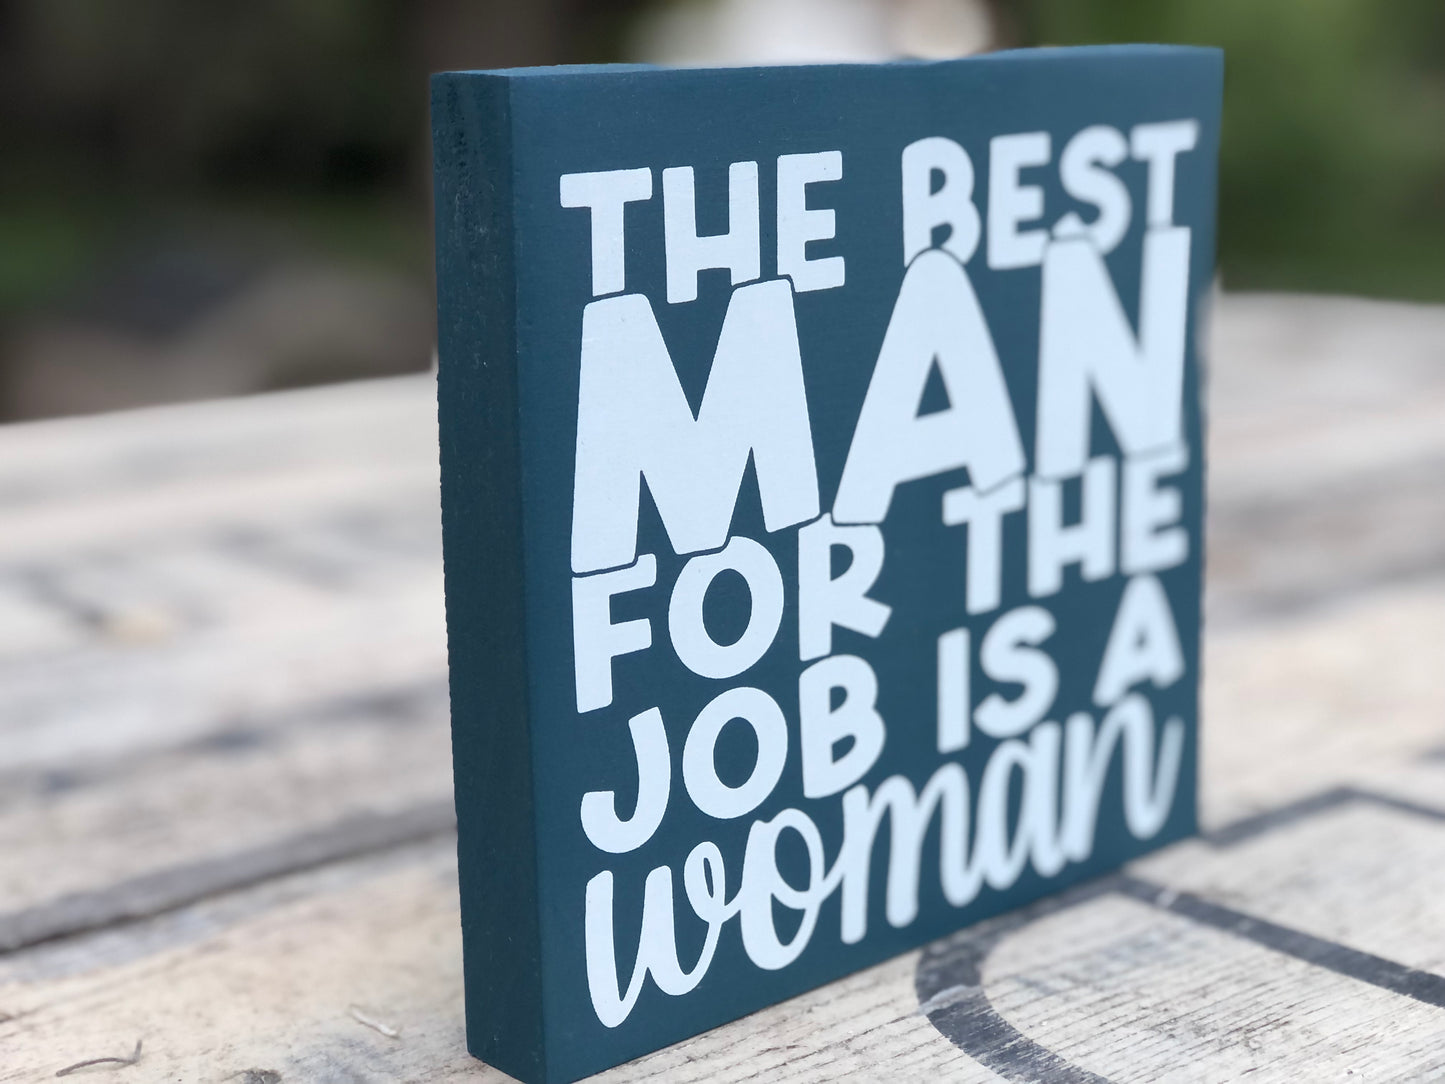 THE BEST MAN FOR THE JOB IS A WOMAN -WE’RE ALL CRAZY -WOOD SIGN